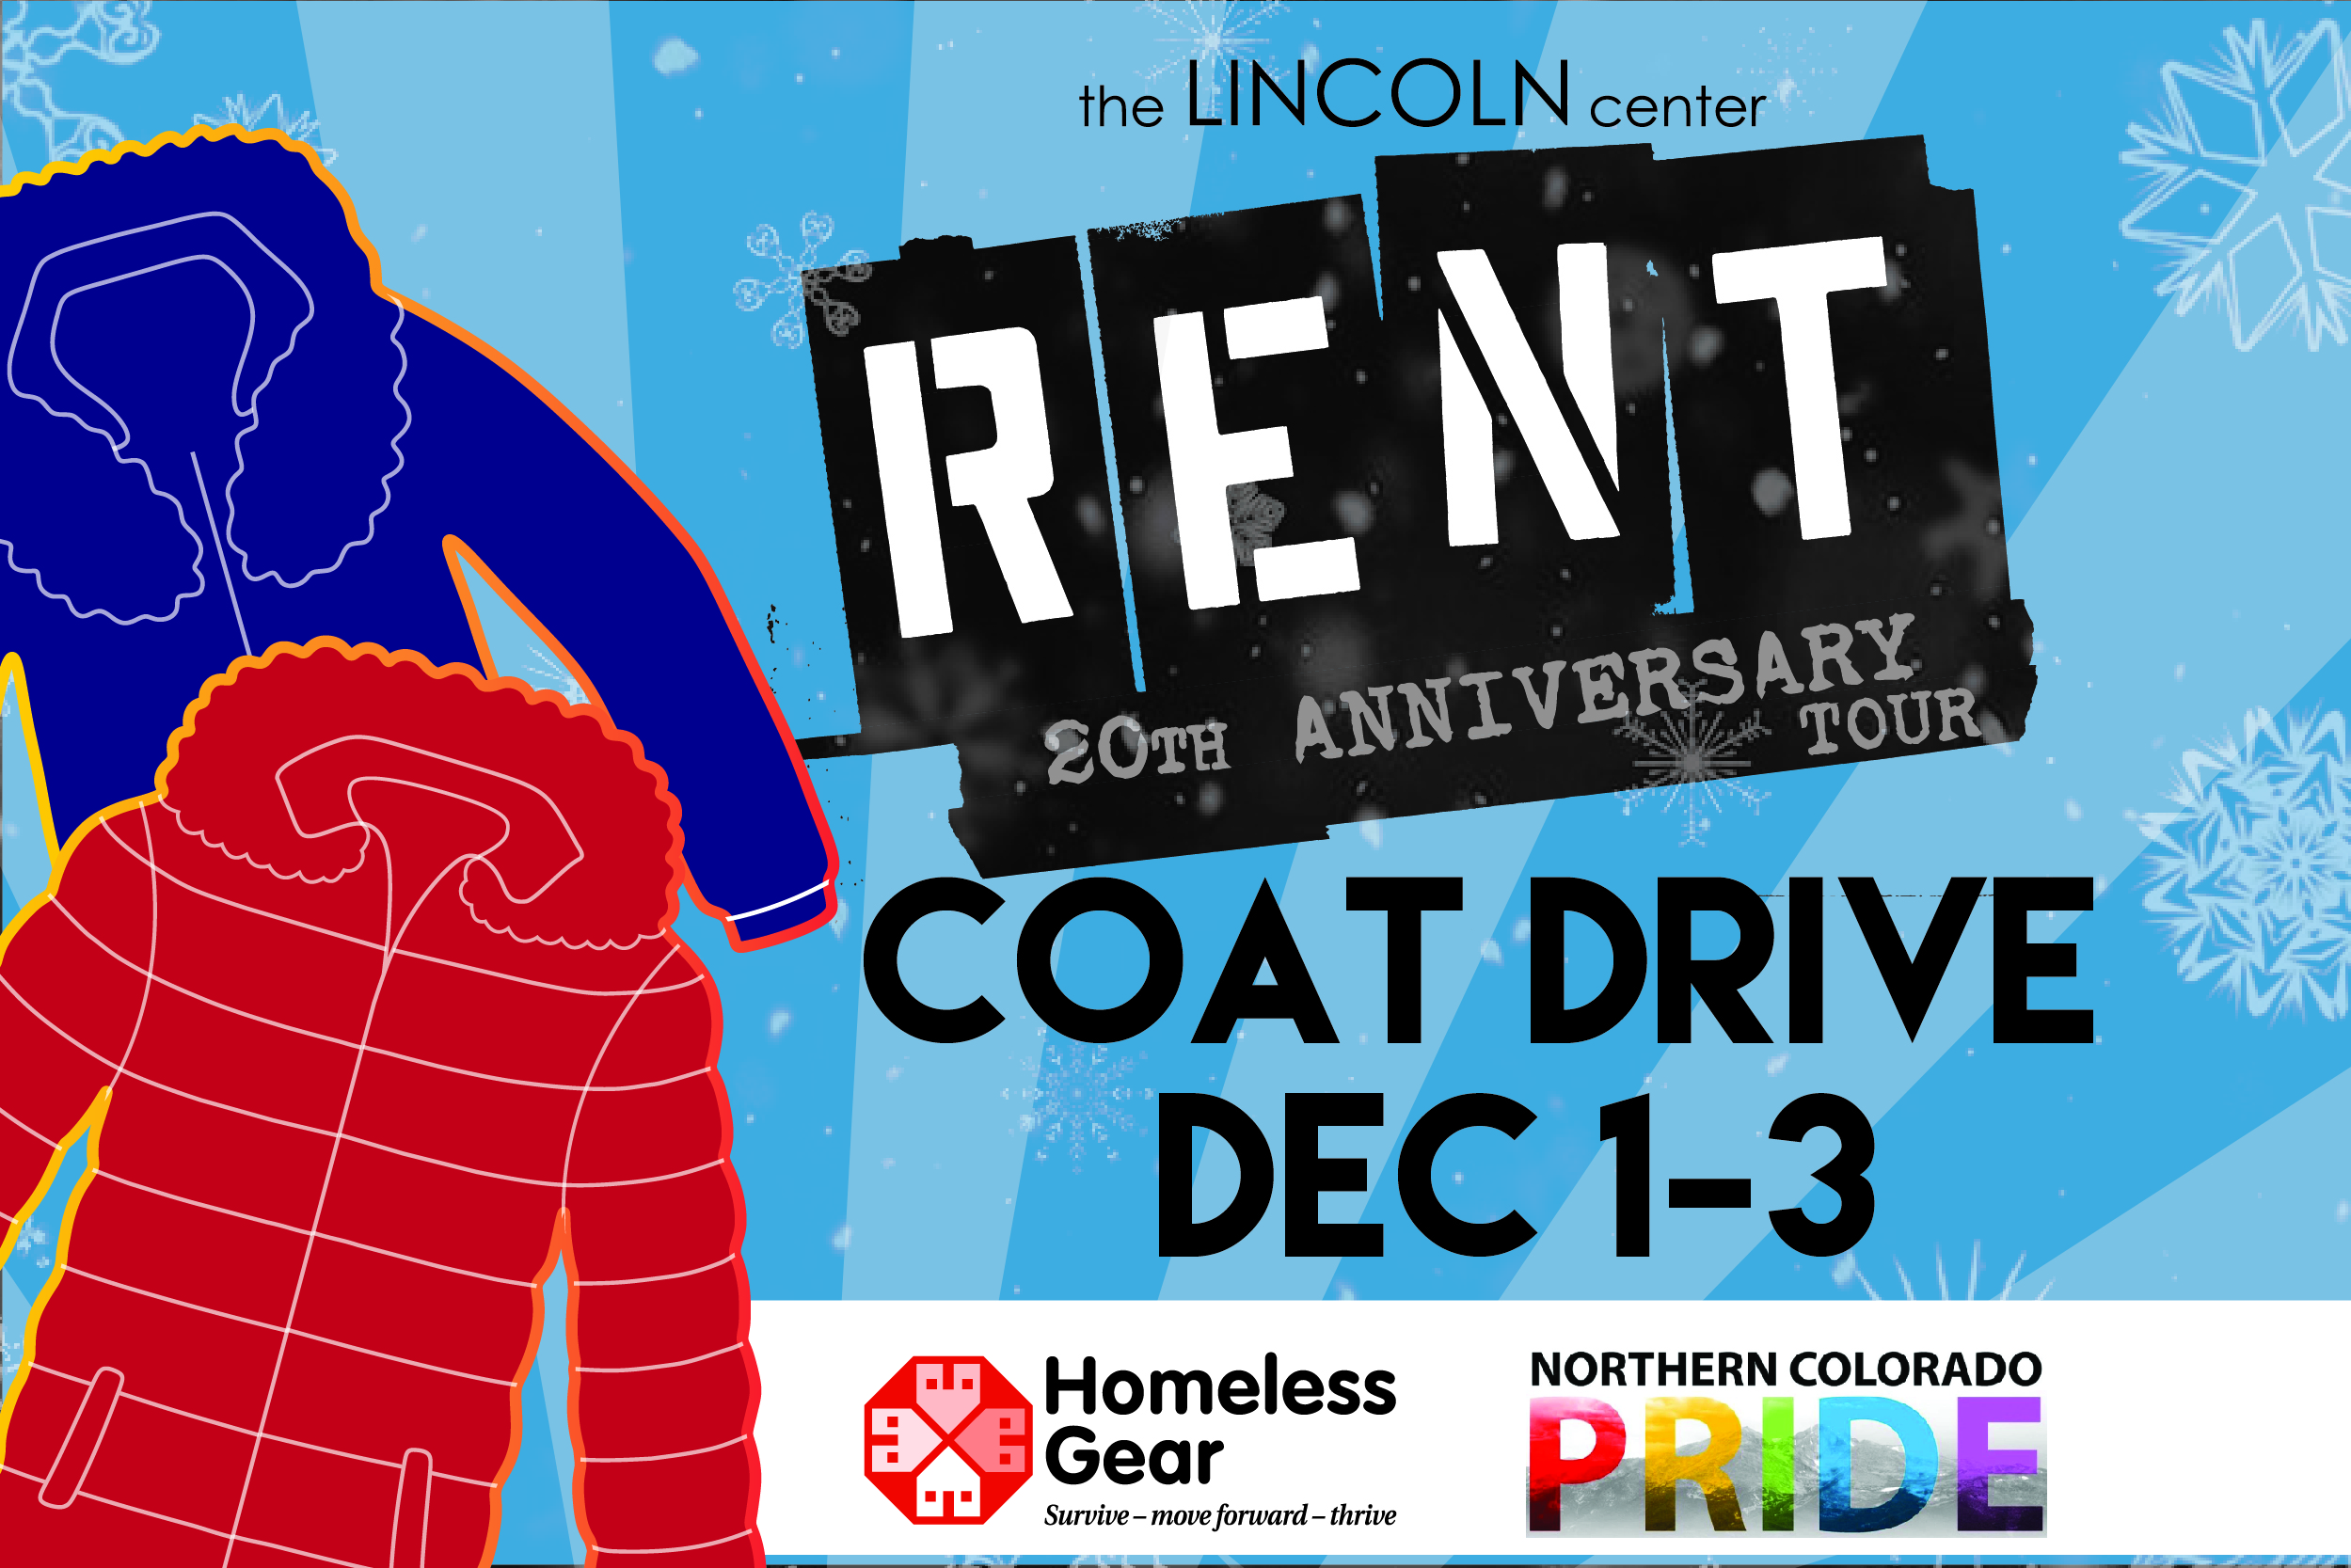 Coat Drive graphic for Rent including the logos for Homeless Gear and Northern Colorado Pride.